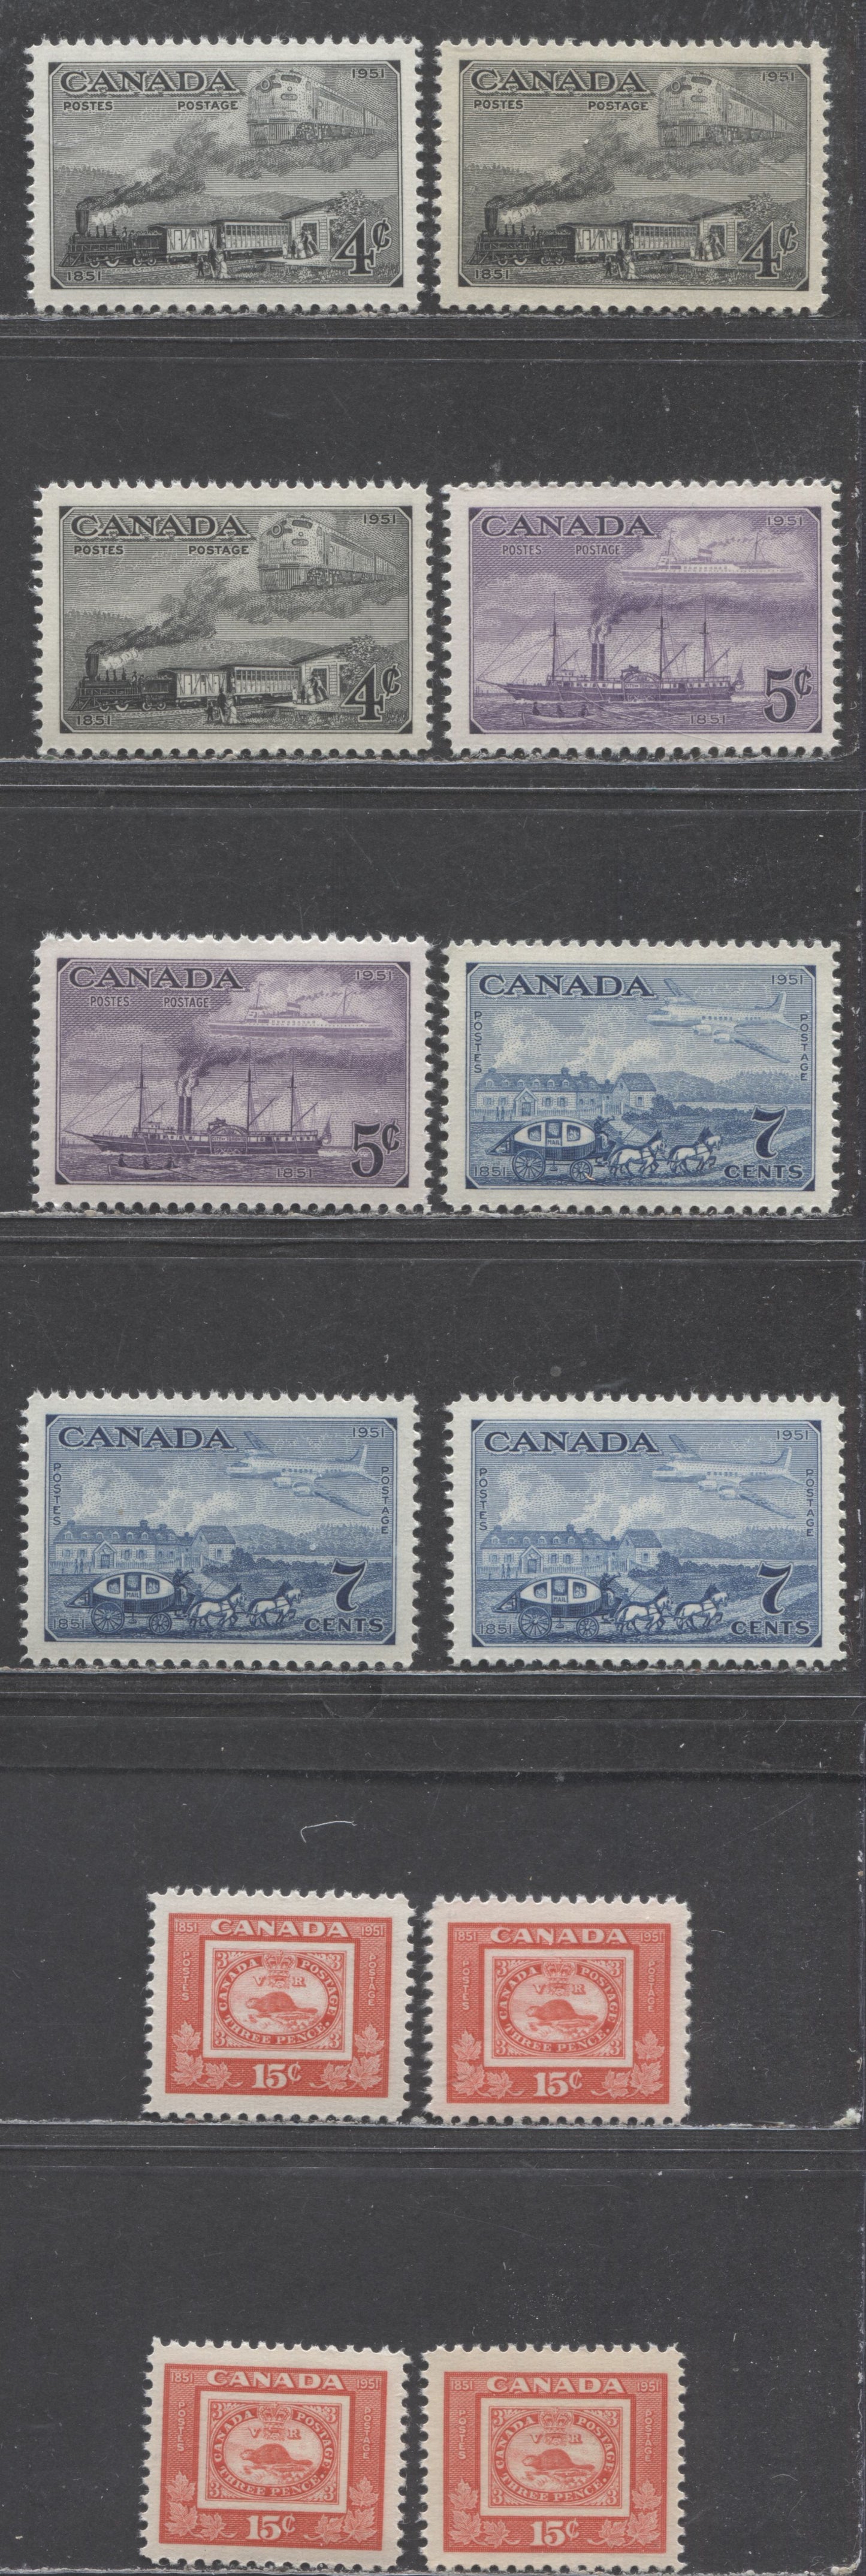 Canada #311-314 4c-15c Train, Steamship, Mail Coach & Threepenny Beaver, 1951 CAPEX '51, 12 VFNH Singles,Cream & White Horizontal, Smooth & Vertically Ribbed Papers, Different Shades Cream and Yellowish Cream Semi-Gloss & Glossy Gums